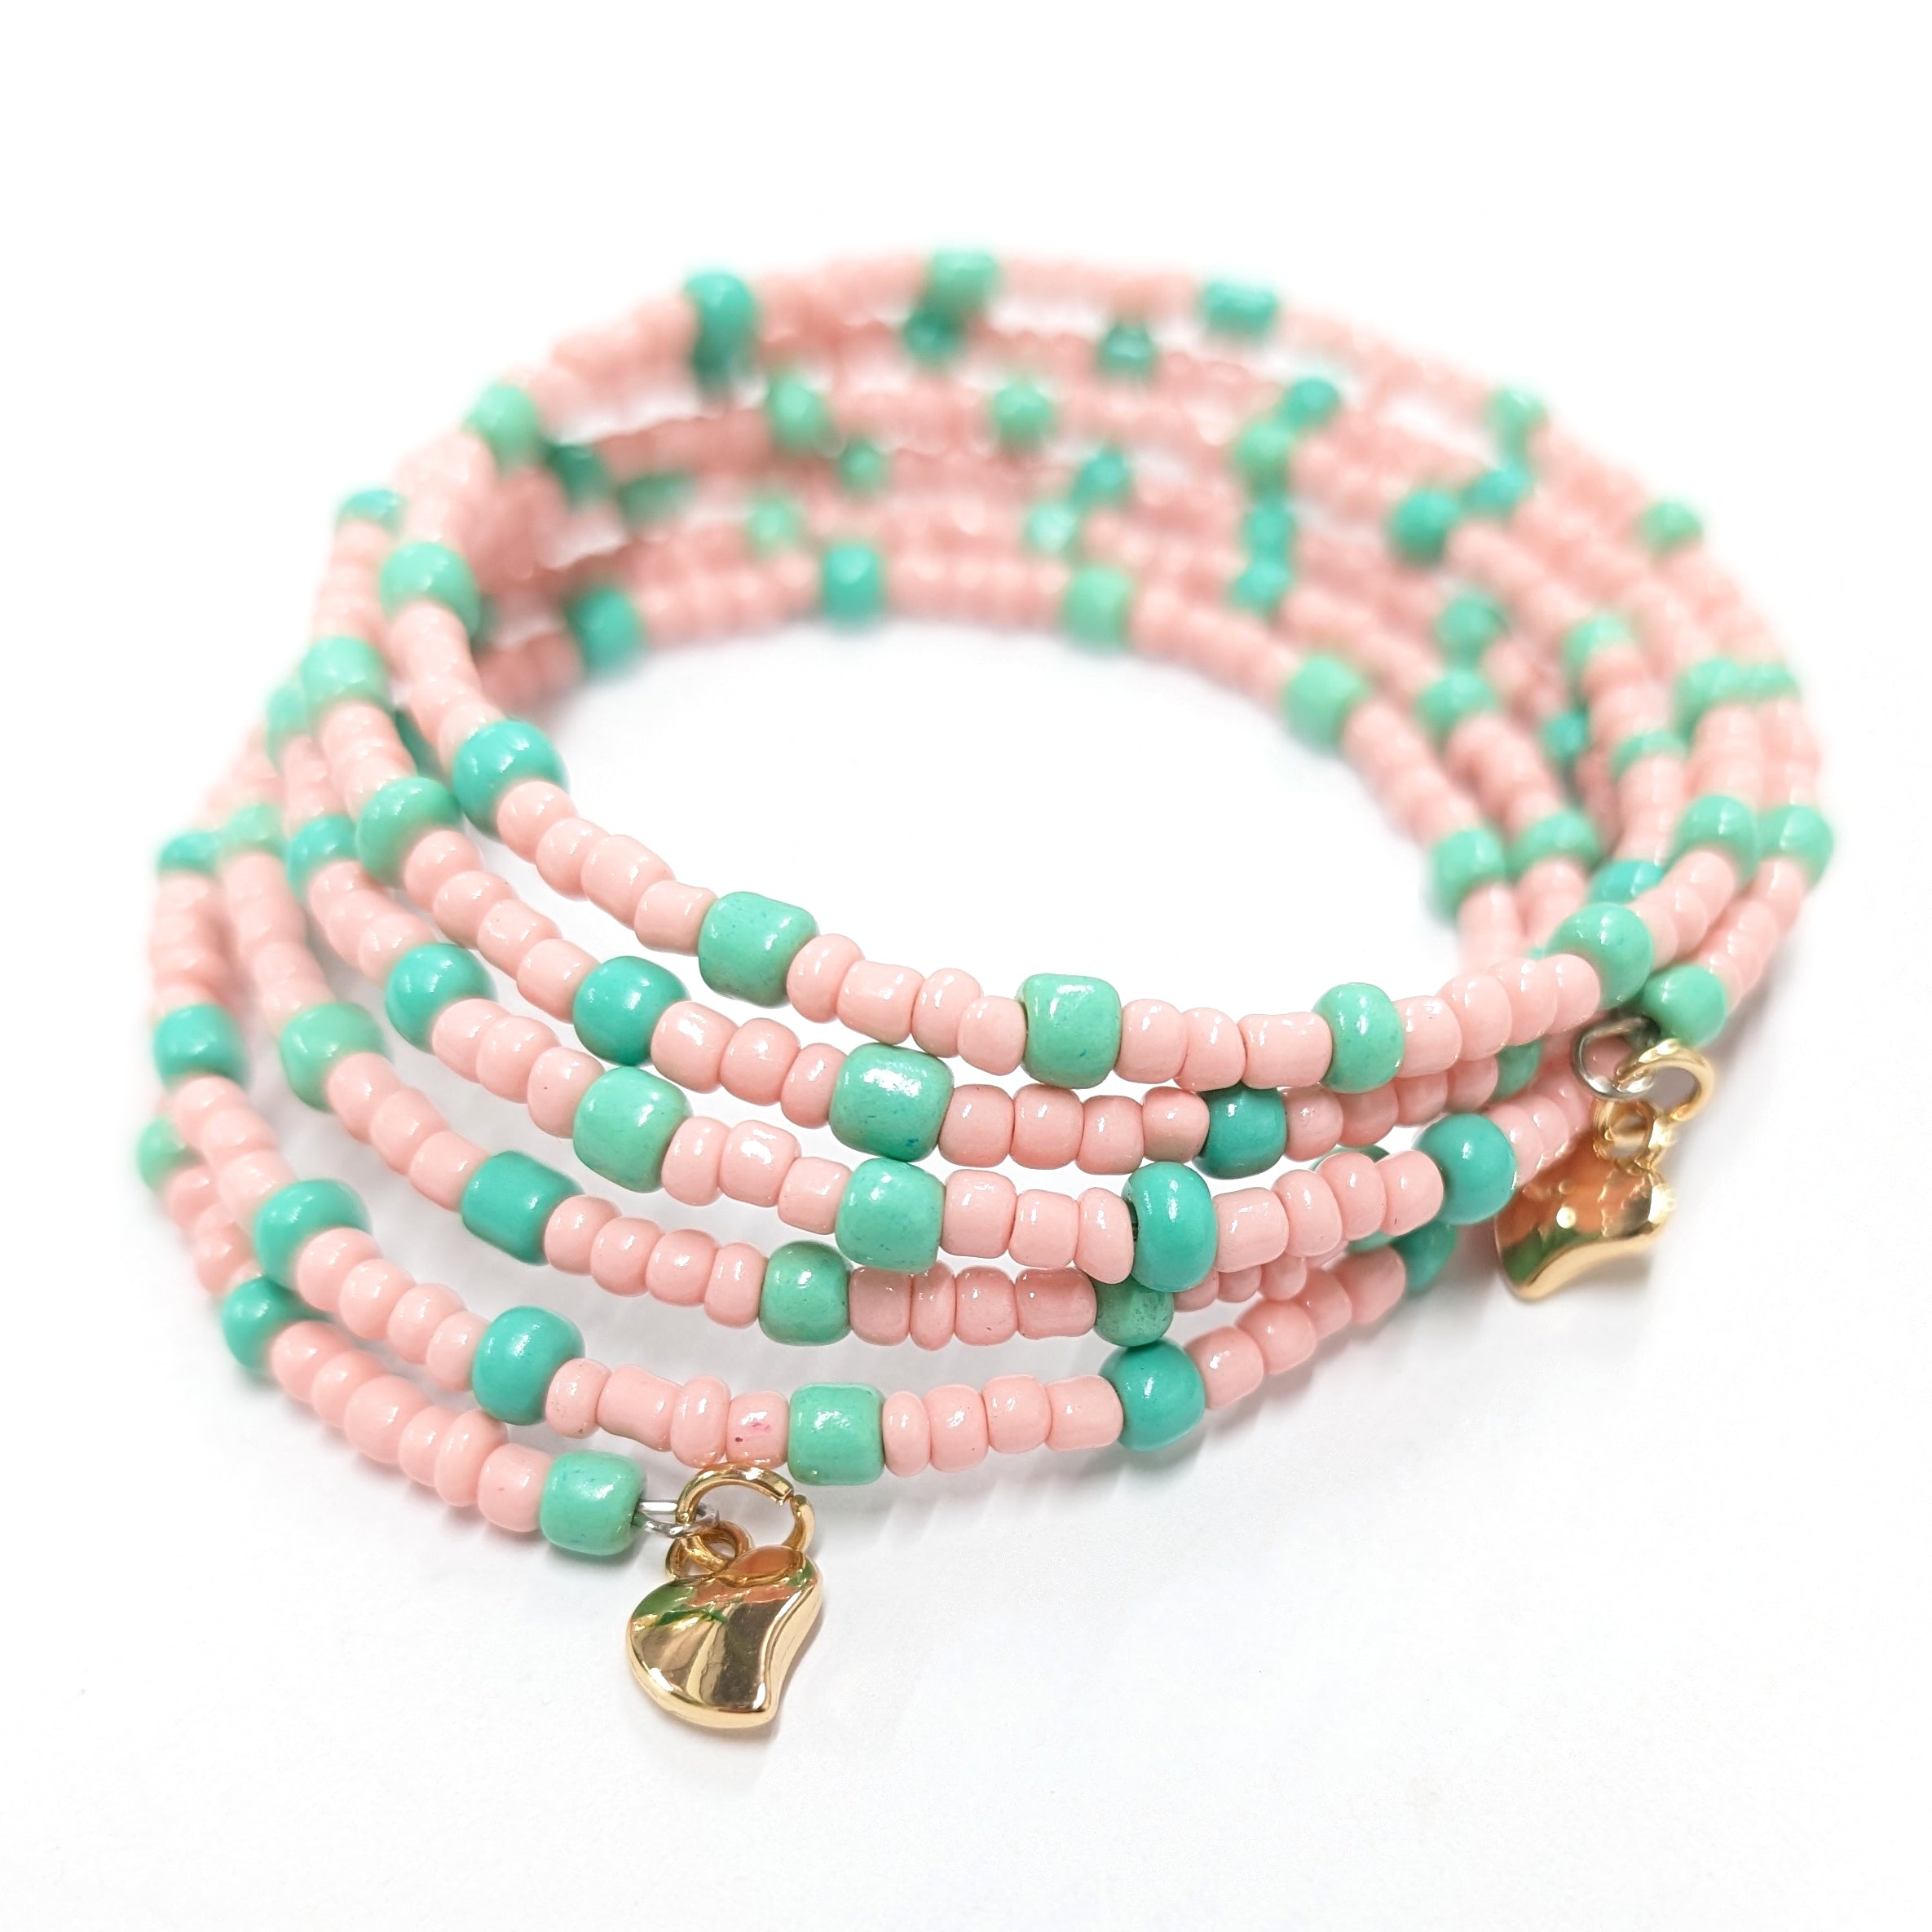 Coil Seed Bead Bracelet - Pink & Turquoise